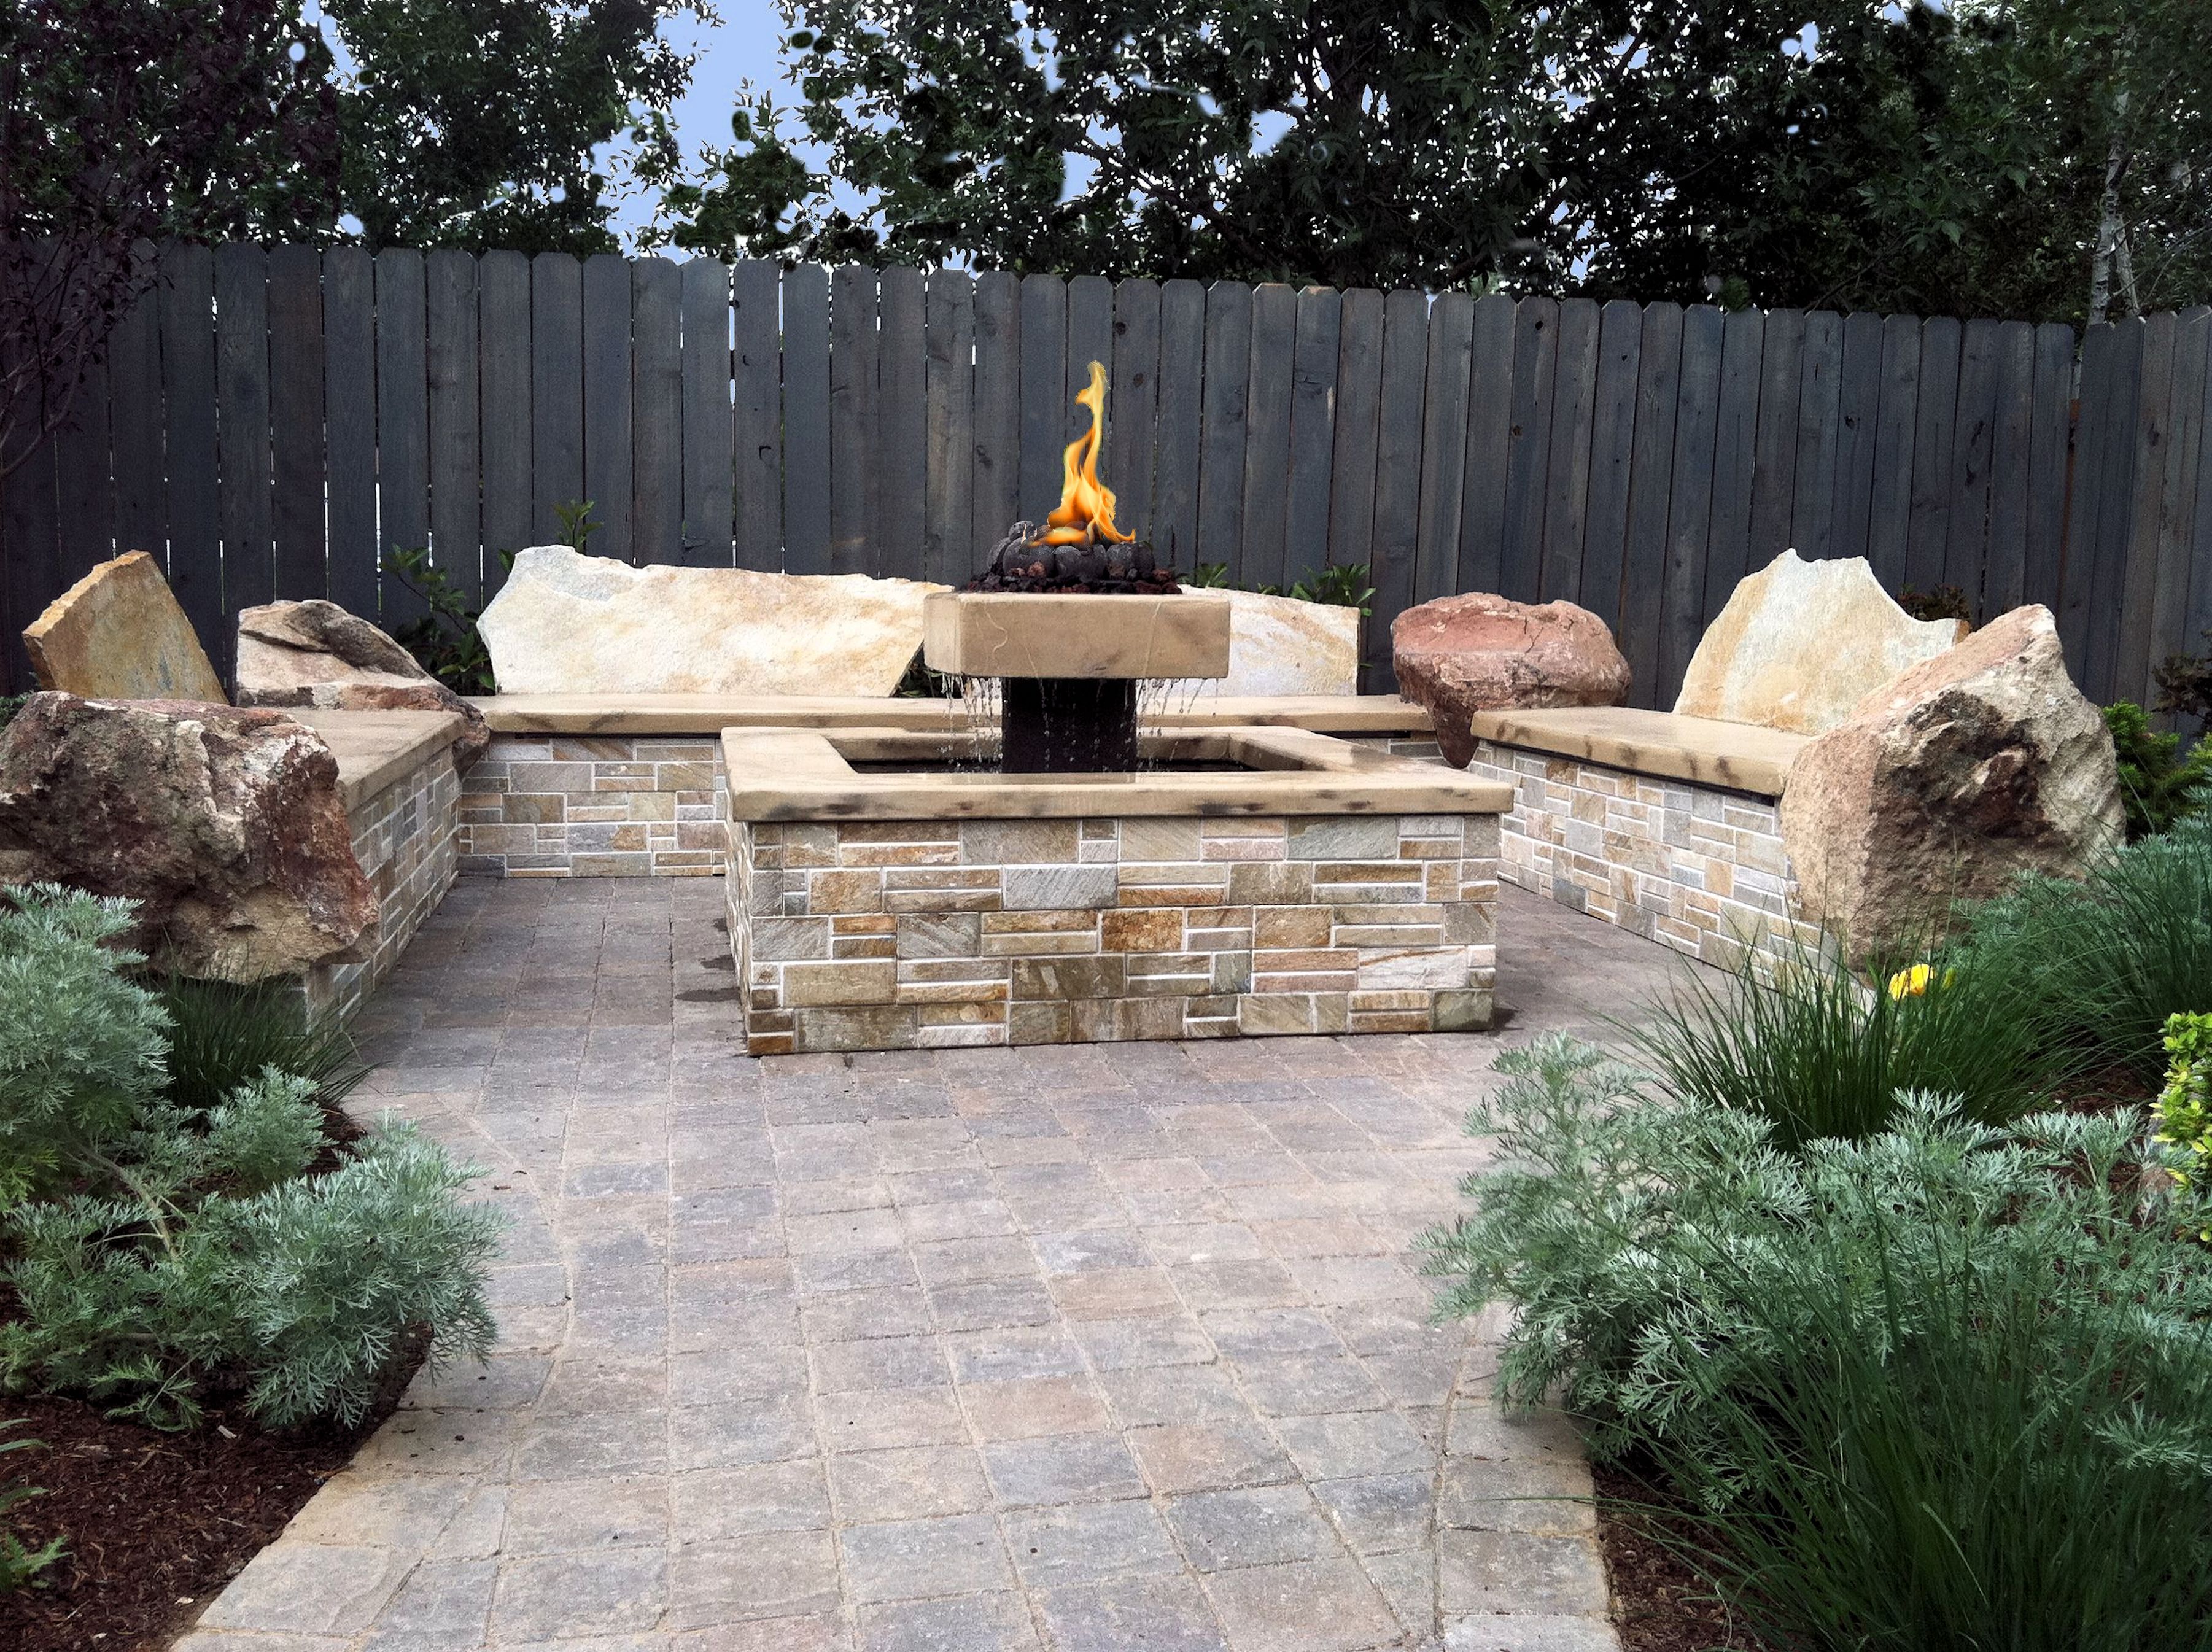 Sitting Area with Fire Feature | The Garden Artist Boise, ID